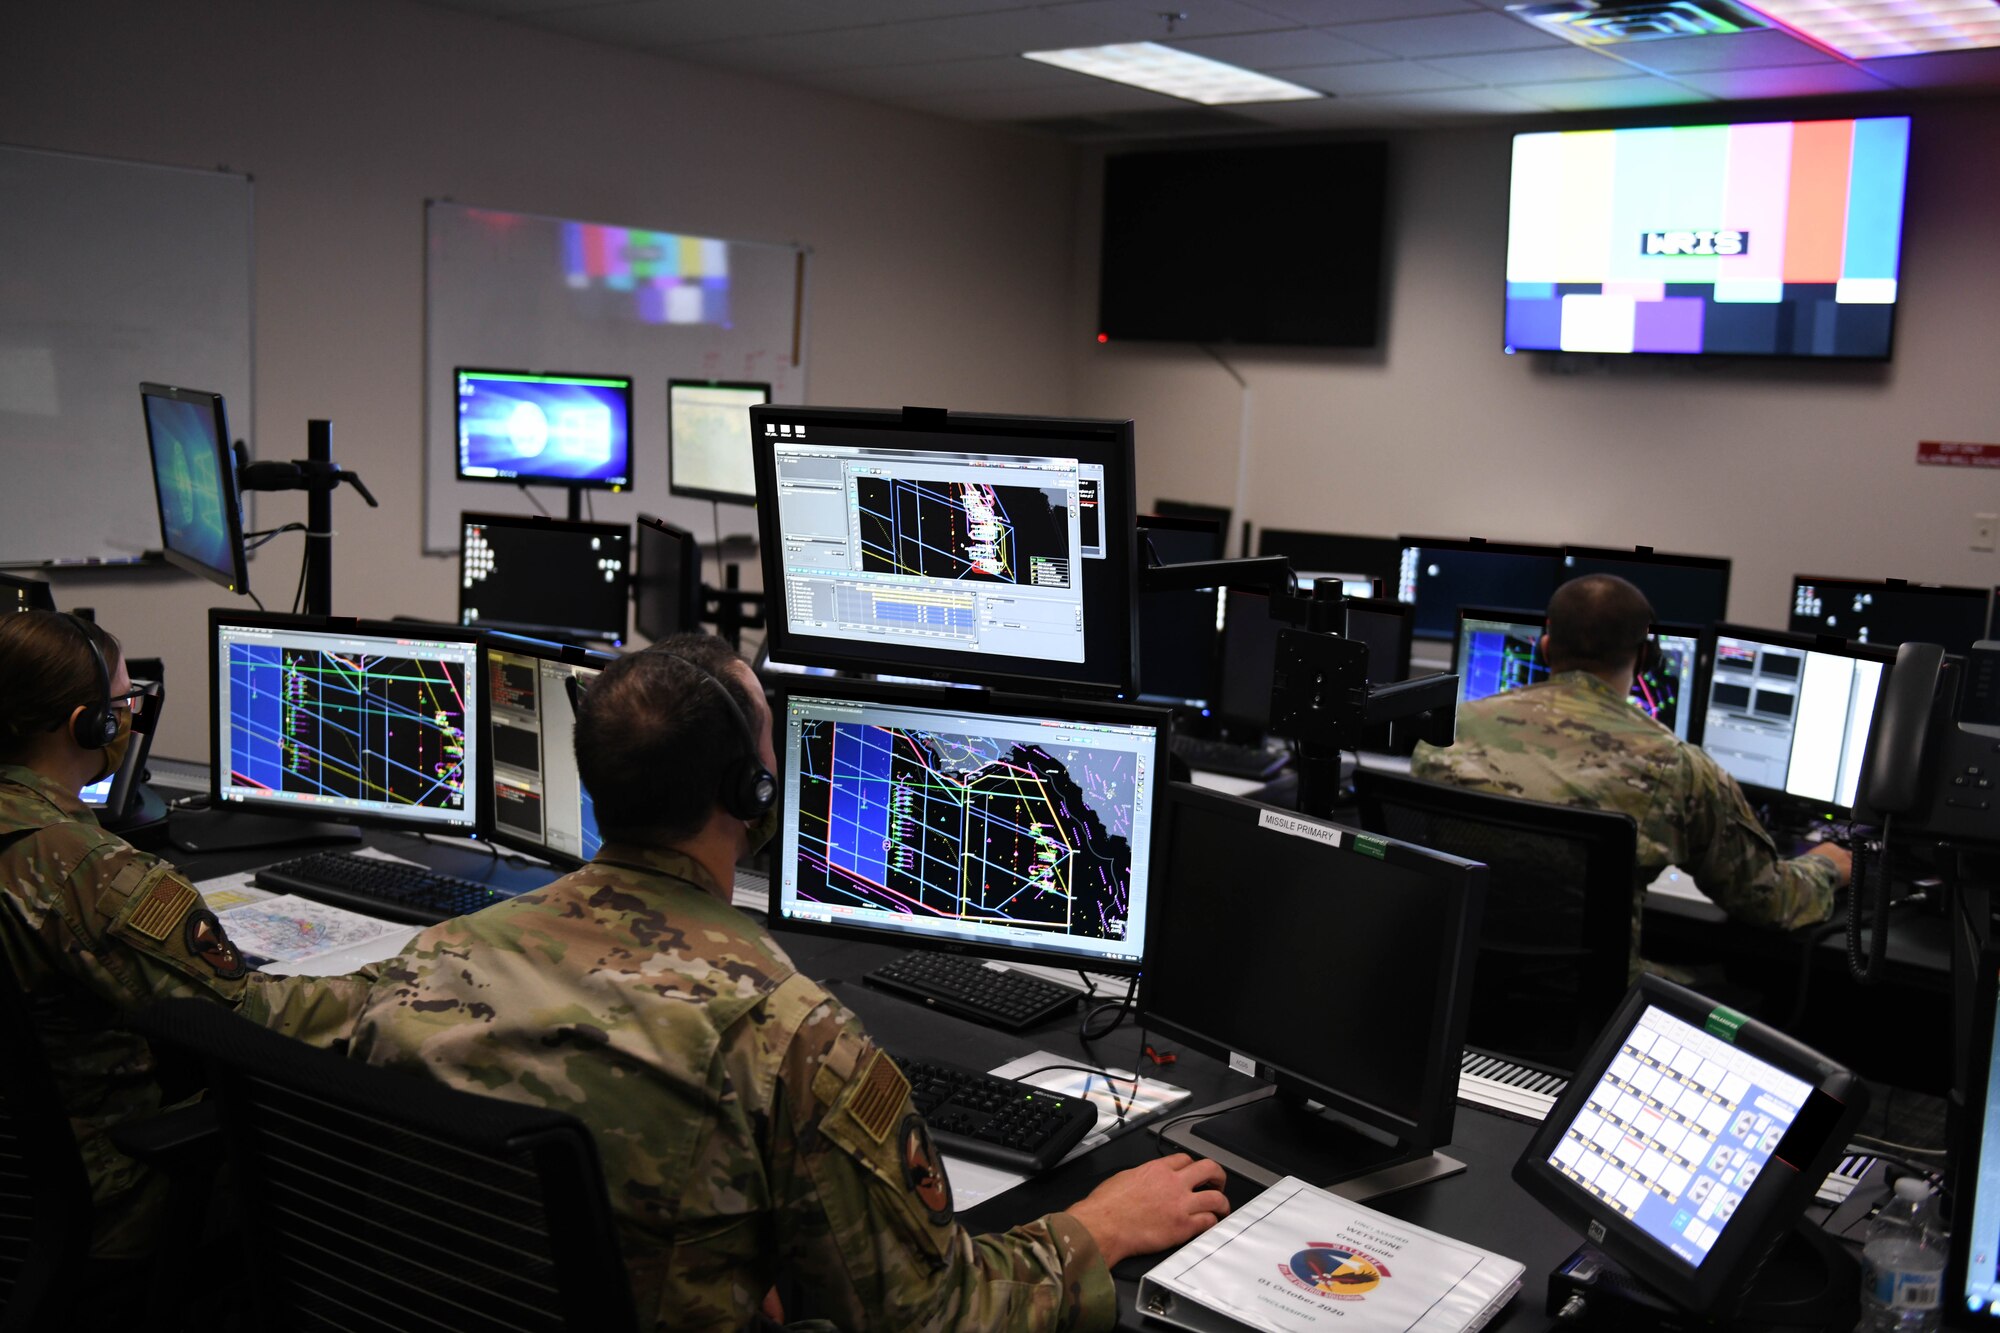 U.S. Airmen with the 81st Air Control Squadron provide radar control and monitor airspace at Tyndall Air Force Base, Florida, Nov. 20, 2020. The 81 ACS "WETSTONE" provided command and control during Checkered Flag, a large-force exercise that fosters interoperability through the incorporation of fourth and fifth-generation aircraft in combat training. The 21-1 iteration of the exercise was held at Tyndall Air Force Base, Florida, Nov. 20, 2020. (U.S. Air Force photo by Airman Anabel Del Valle) (Proprietary information redacted)